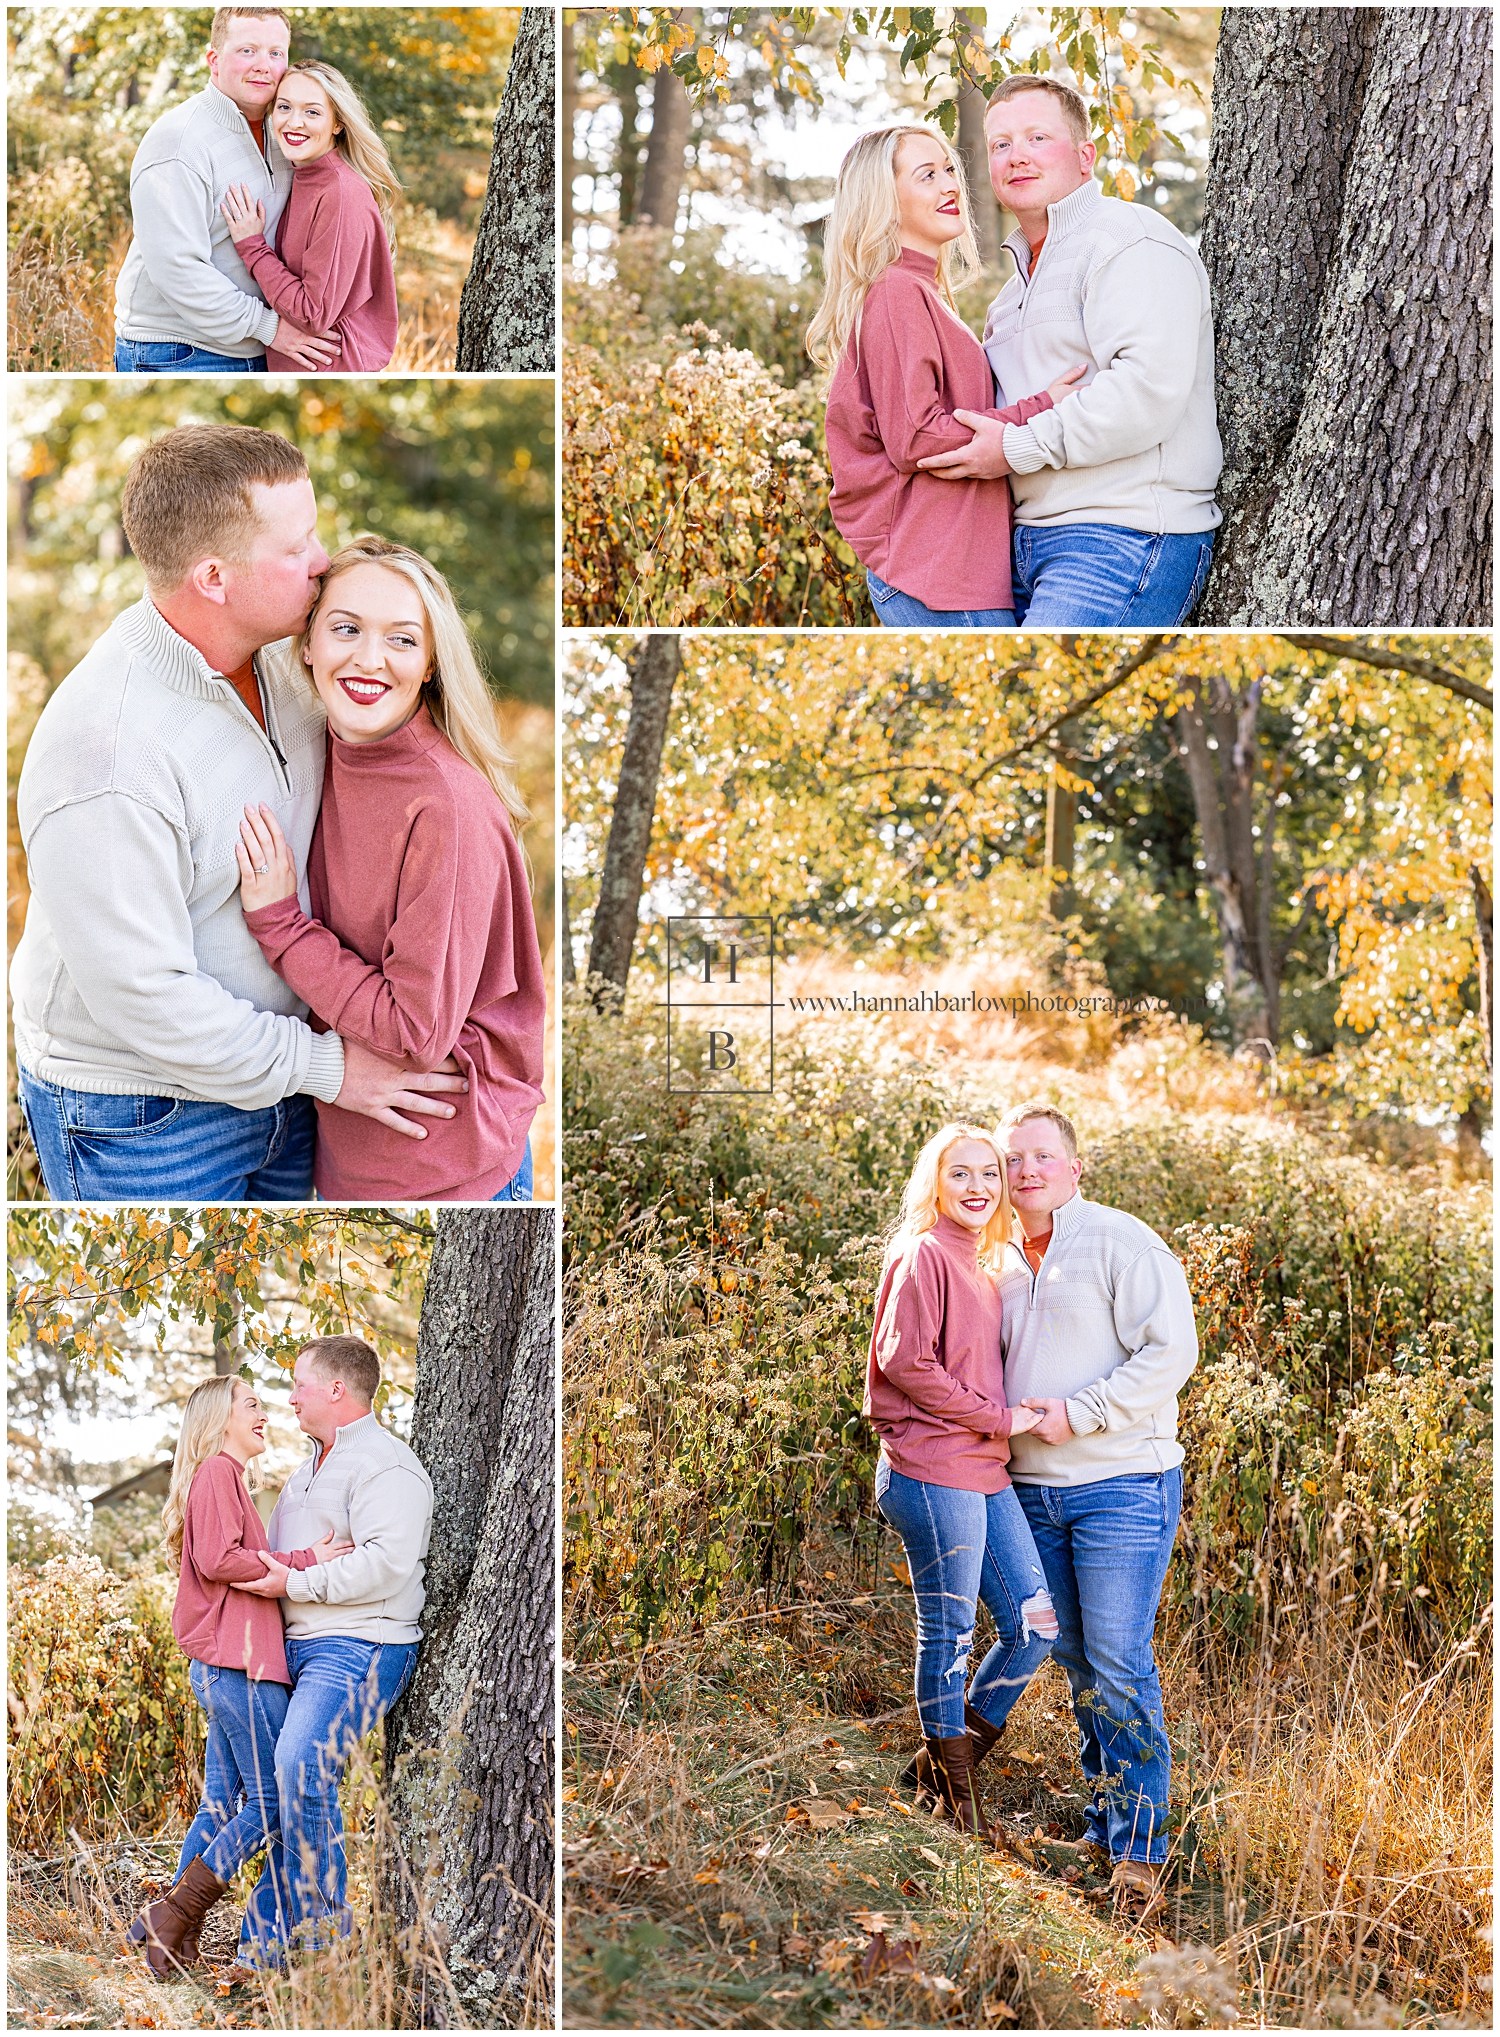 Couple embraces and kisses in fall field for engagement photos.